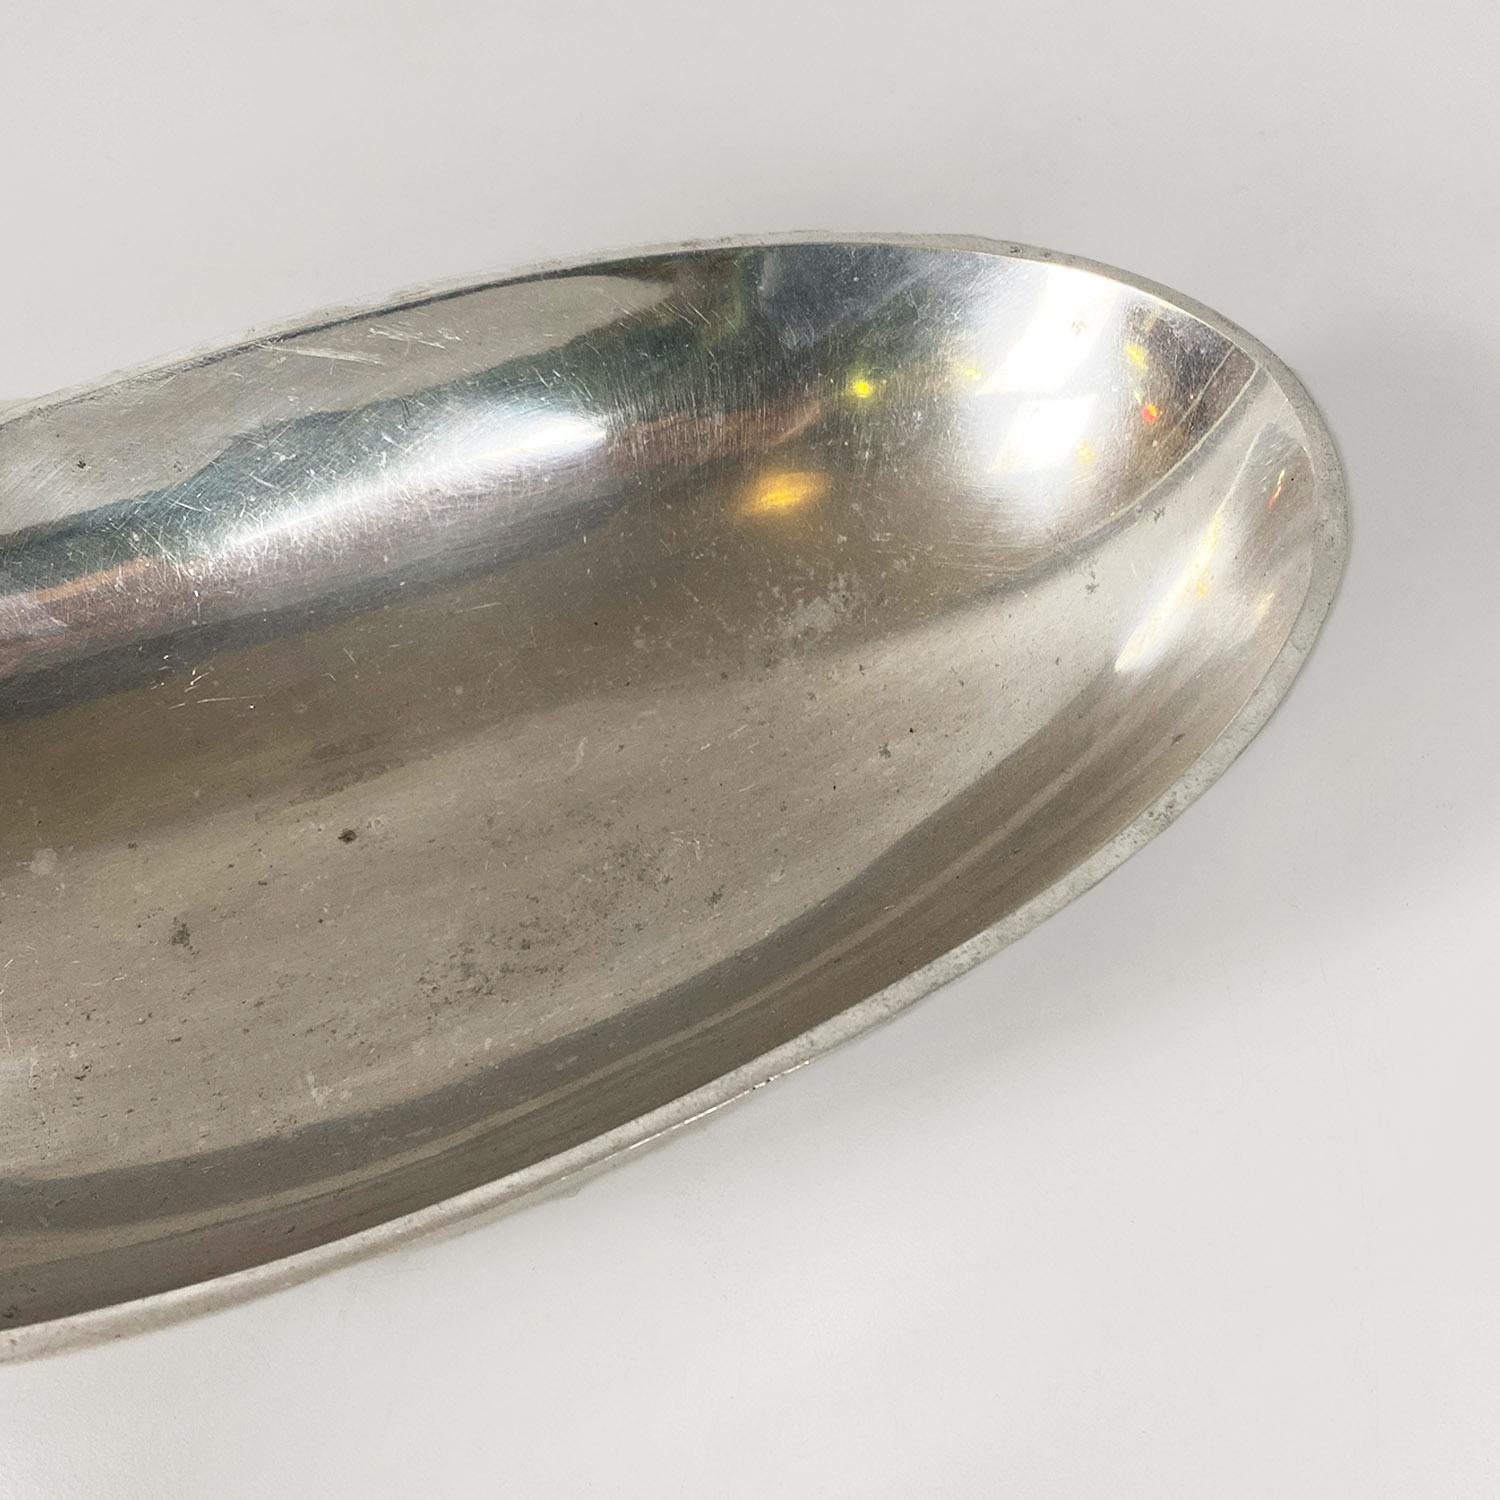 Italian modern metal oval serving bowl or container by La Rinascente, 1990s For Sale 6